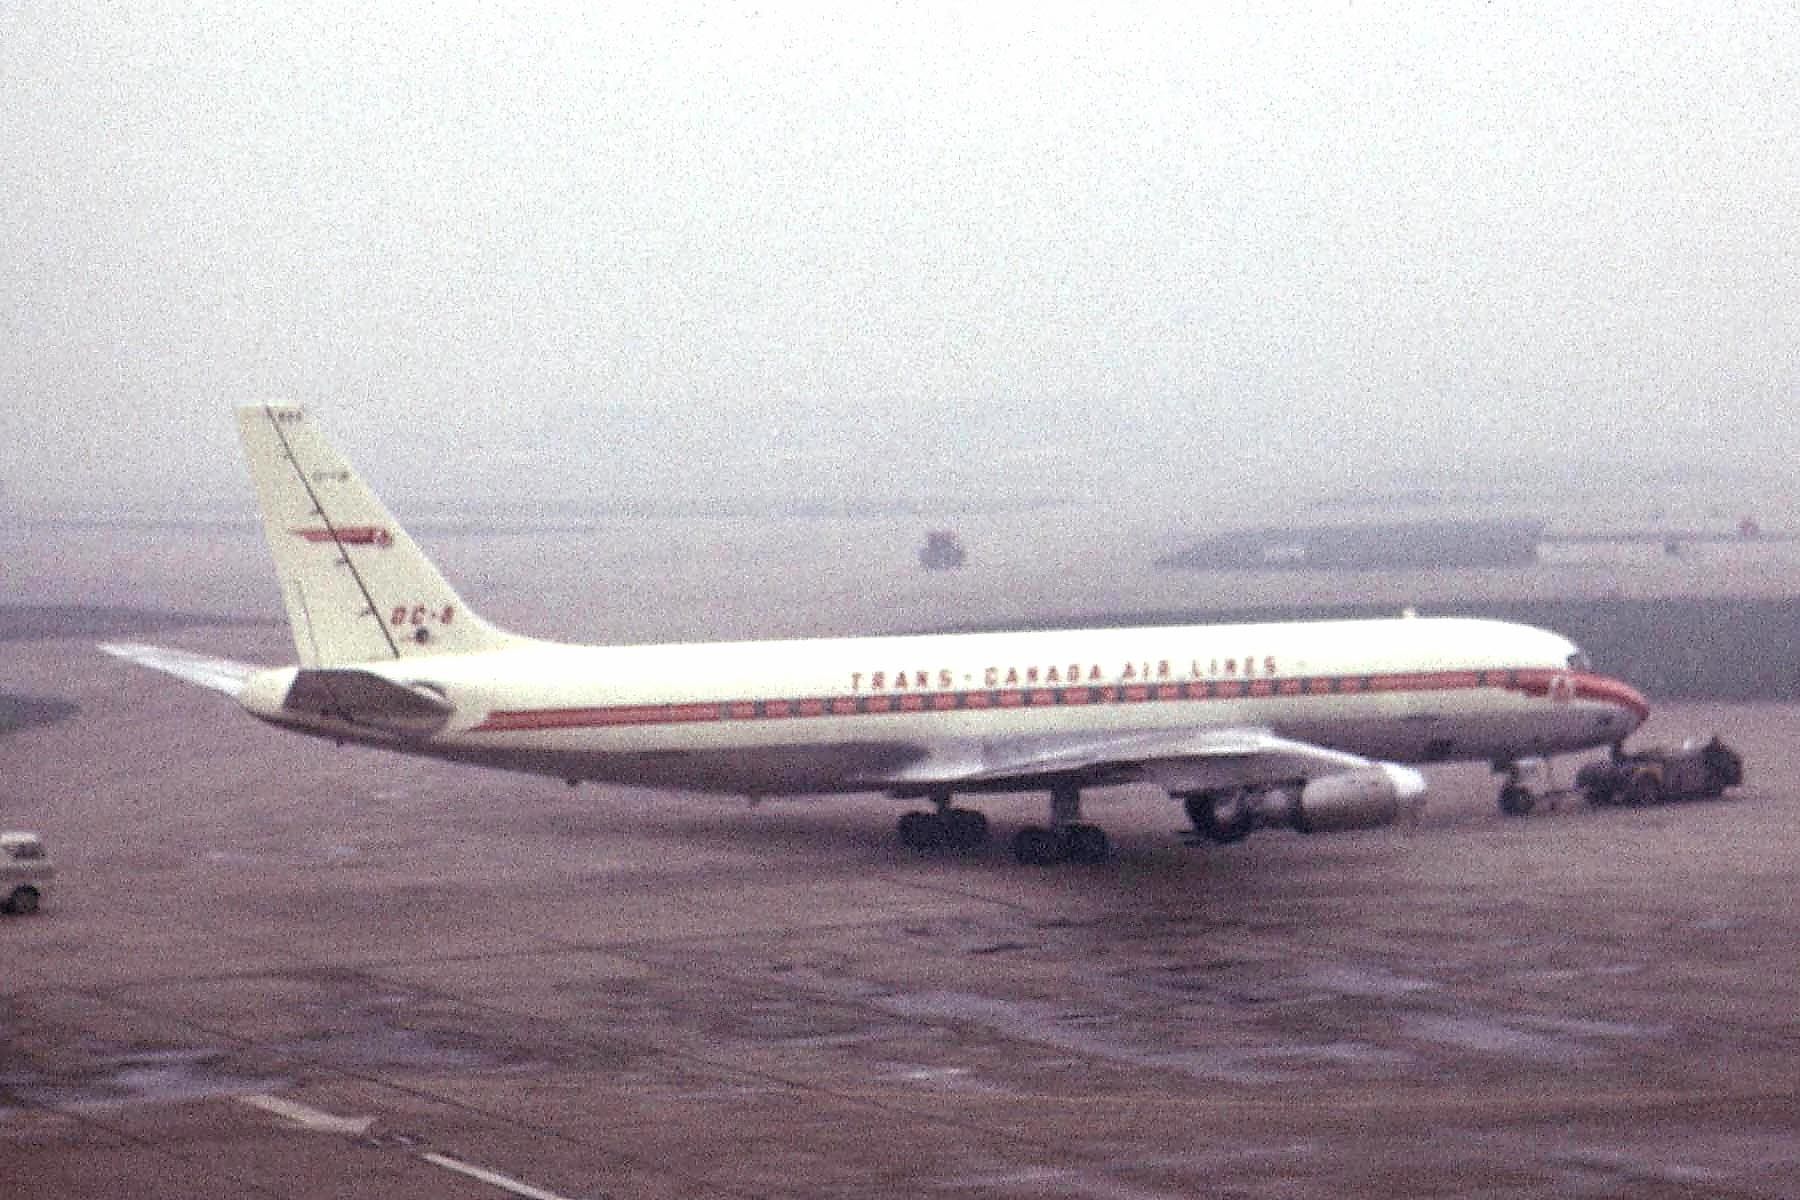 Trans-Canada Airlines DC-8 at London Heathrow Airport in 1964